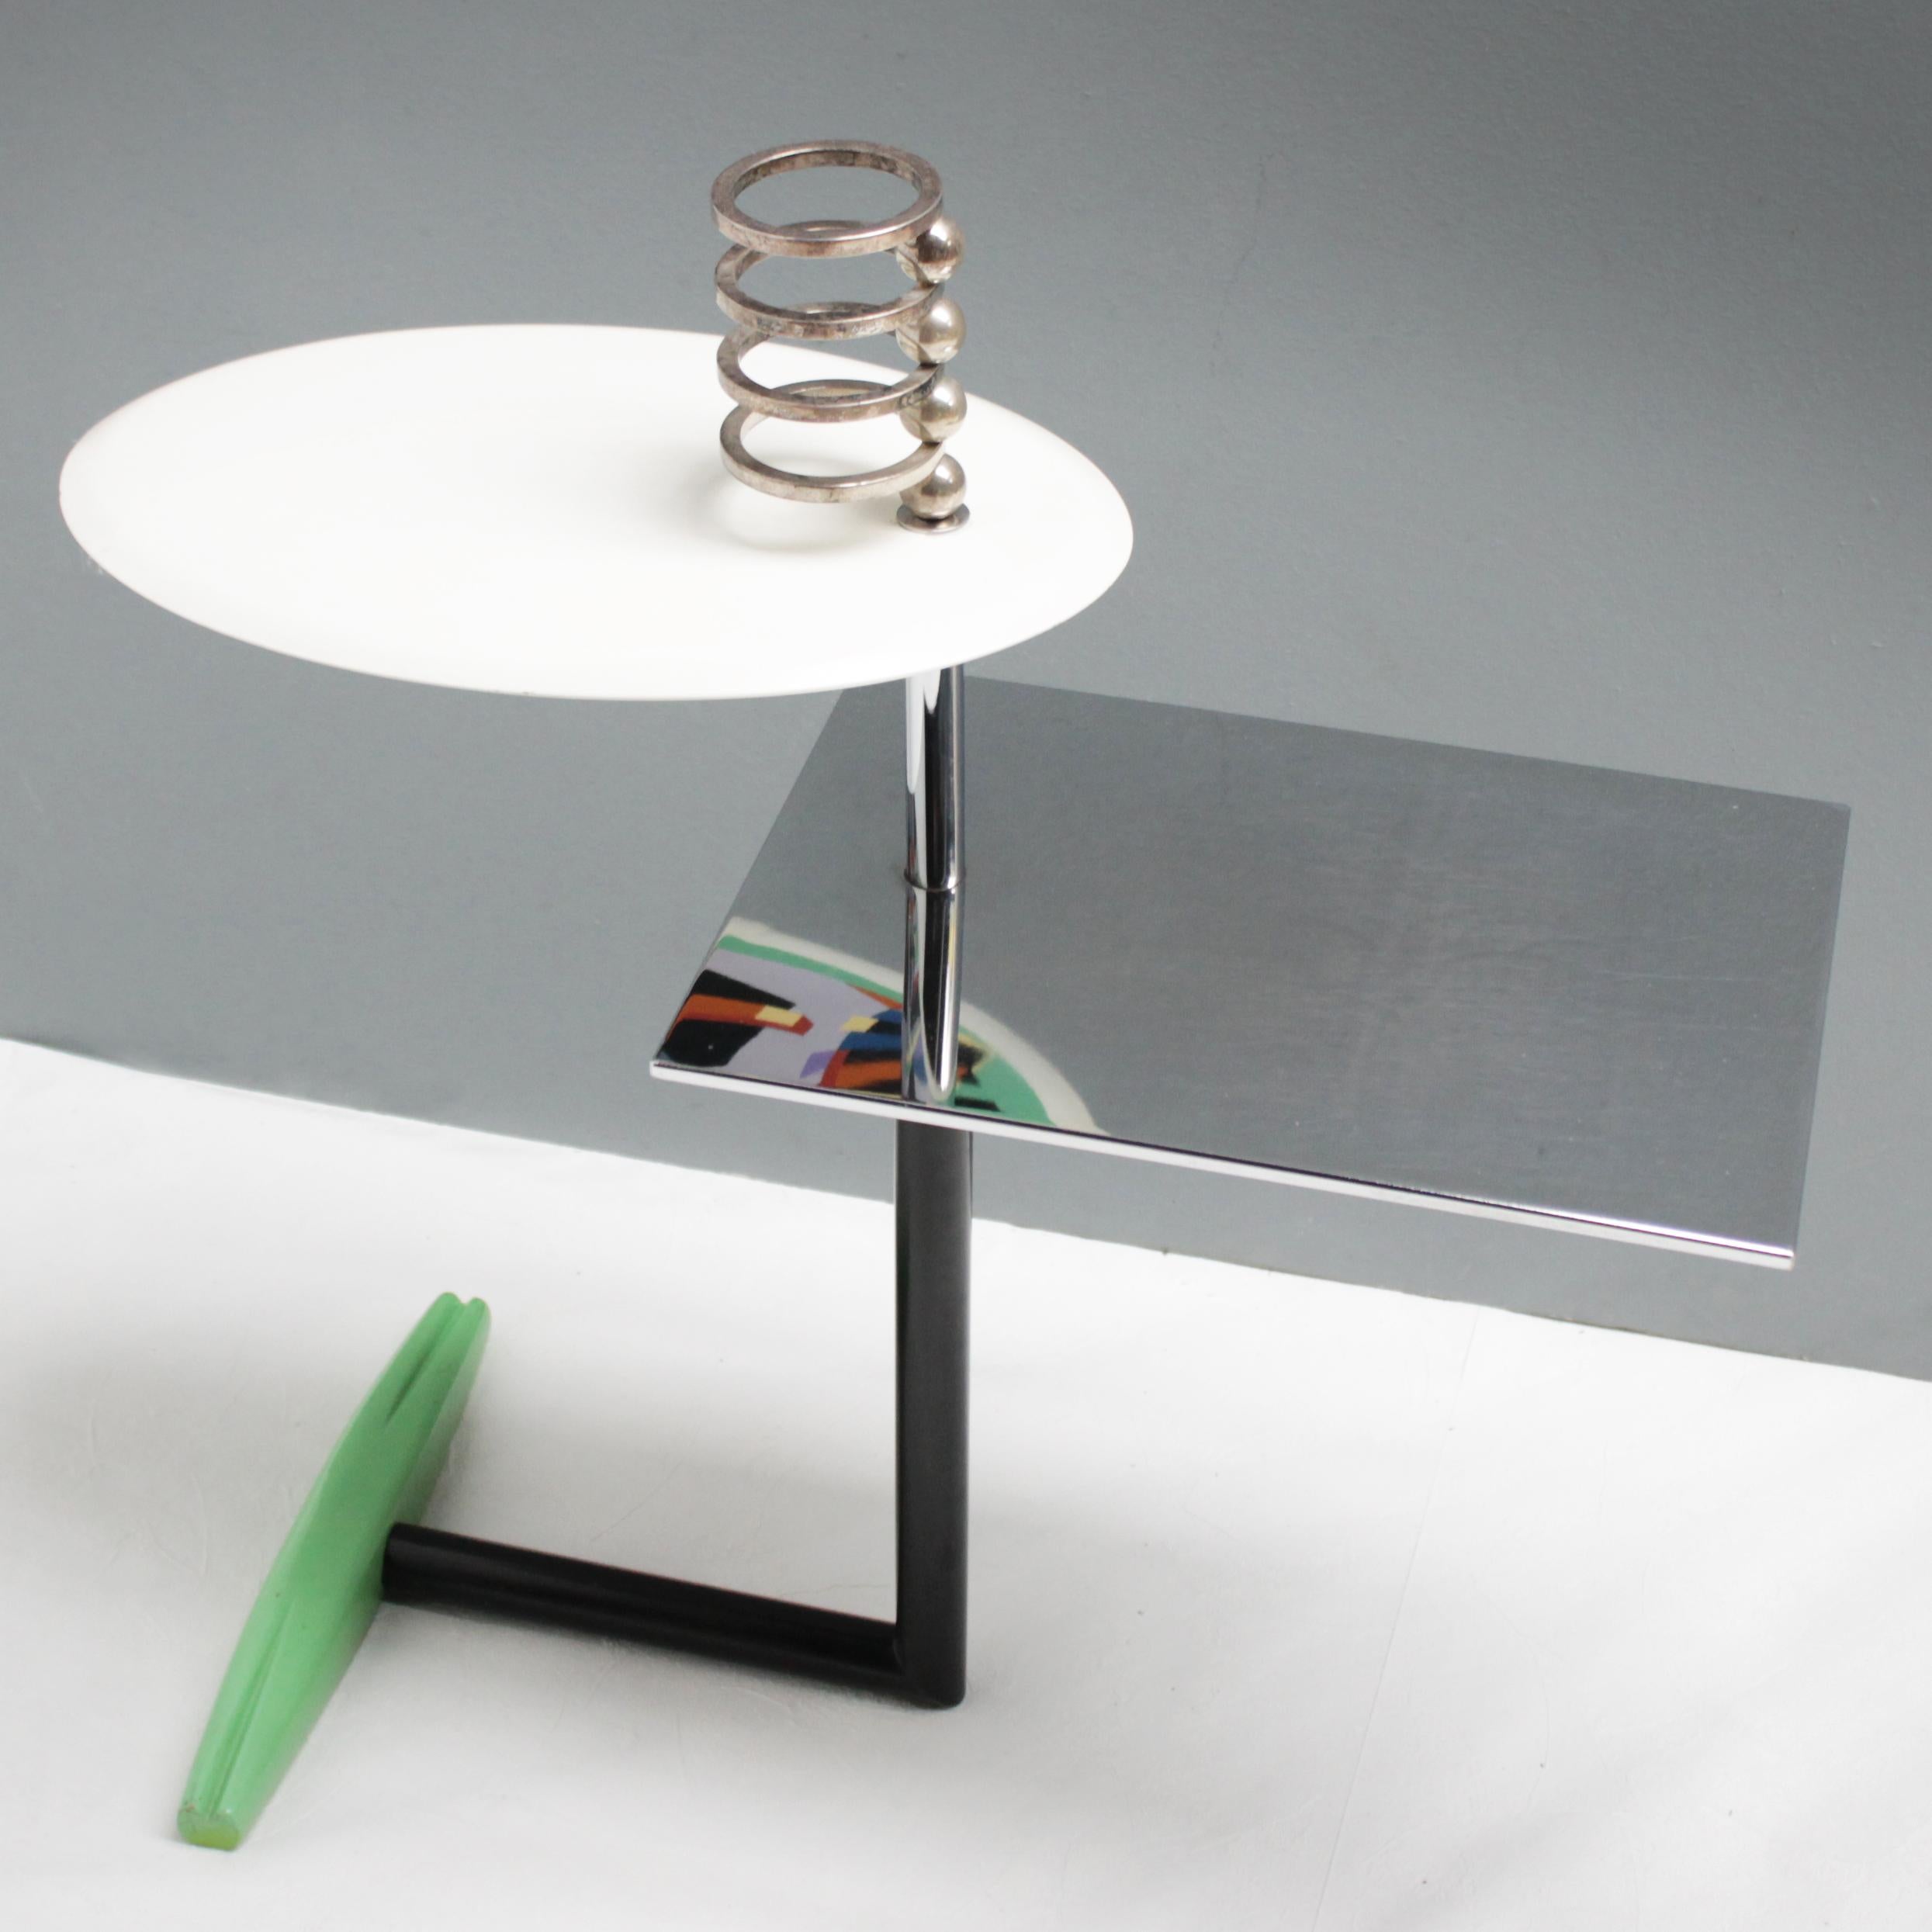 Offered a rare small table 'Acilio' by Alessandro Mendini for Zabro - Nuova Alchimia, Milan. A beautiful and stylish example of design from the Memphis group, the phenomenon from the 80s.
Cast iron with wood-covered base, green lacquered. Chrome